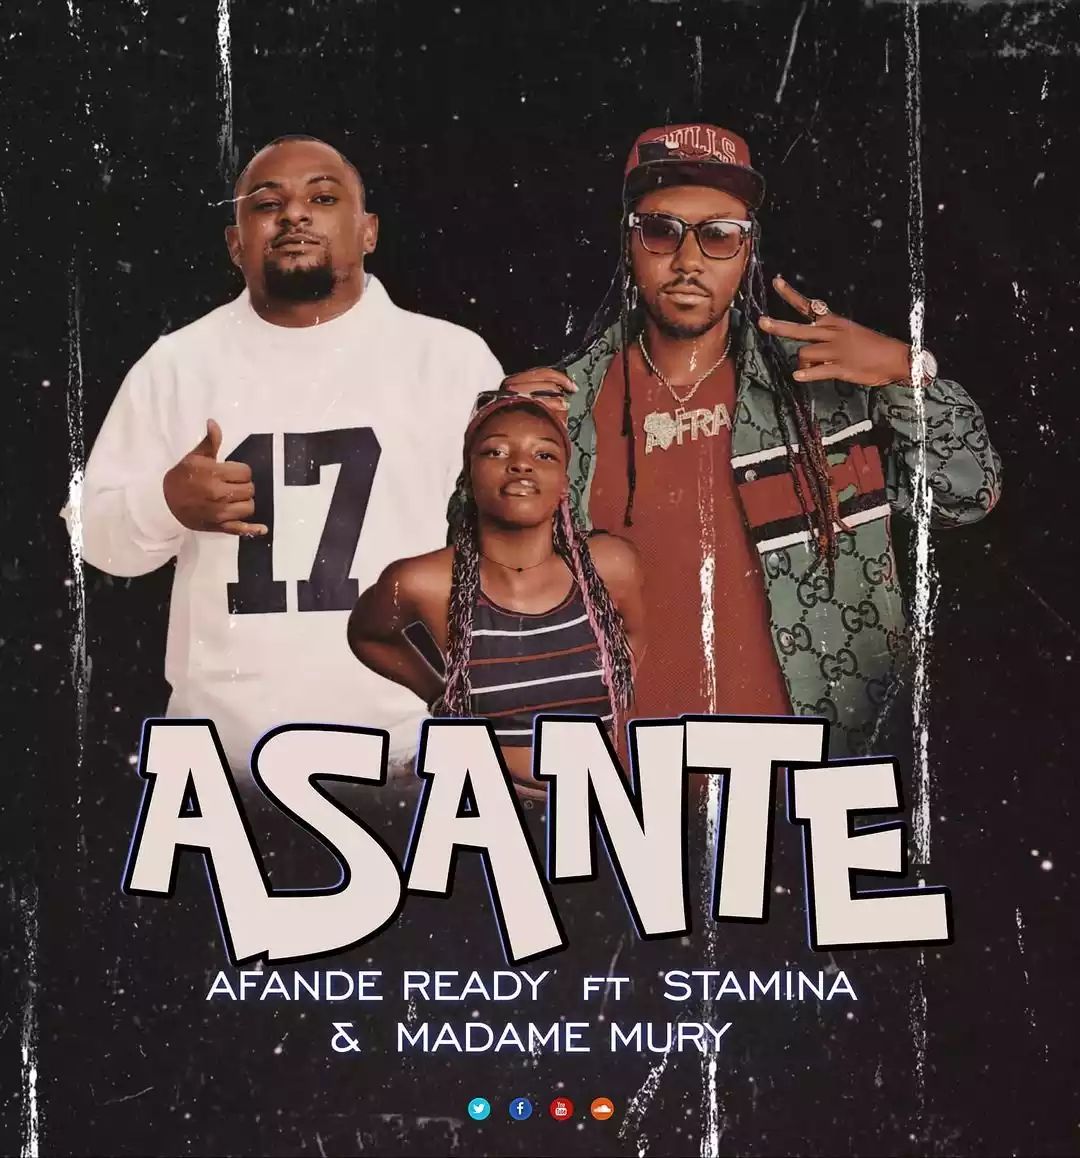 Asante By Afande Ready Ft Stamina & Madame Mury